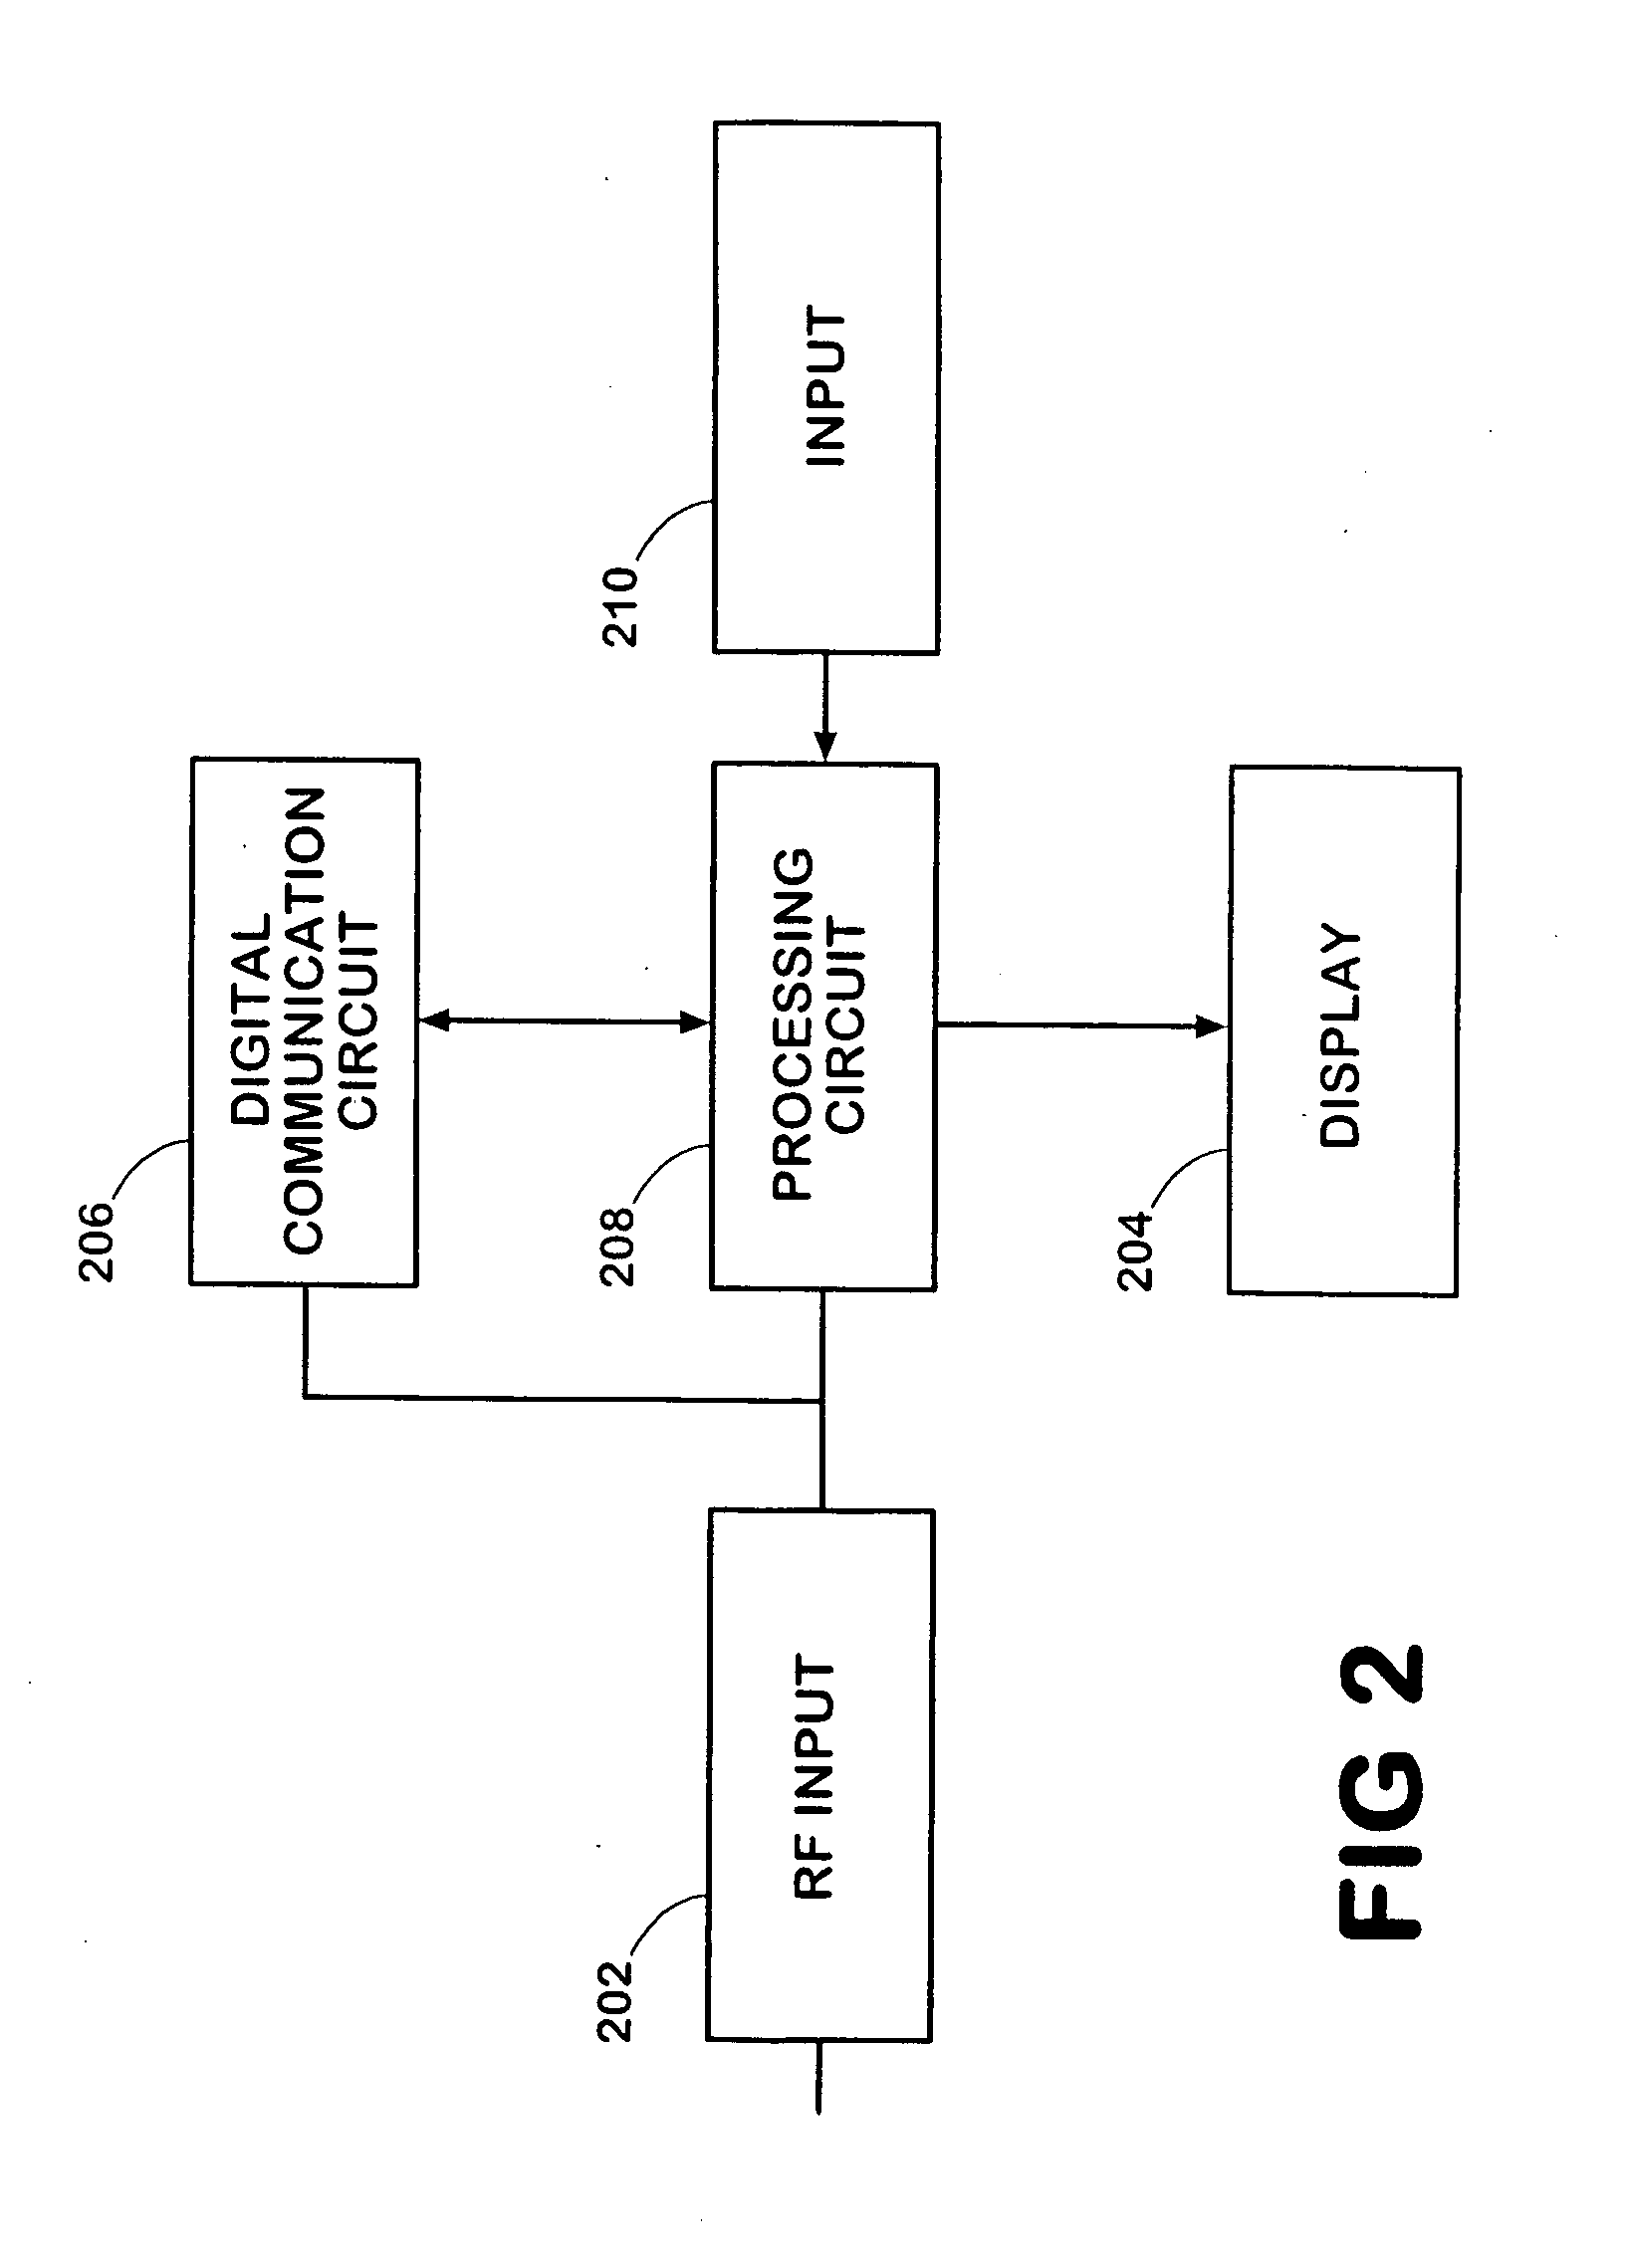 Signal level measurement and data connection quality analysis apparatus and methods